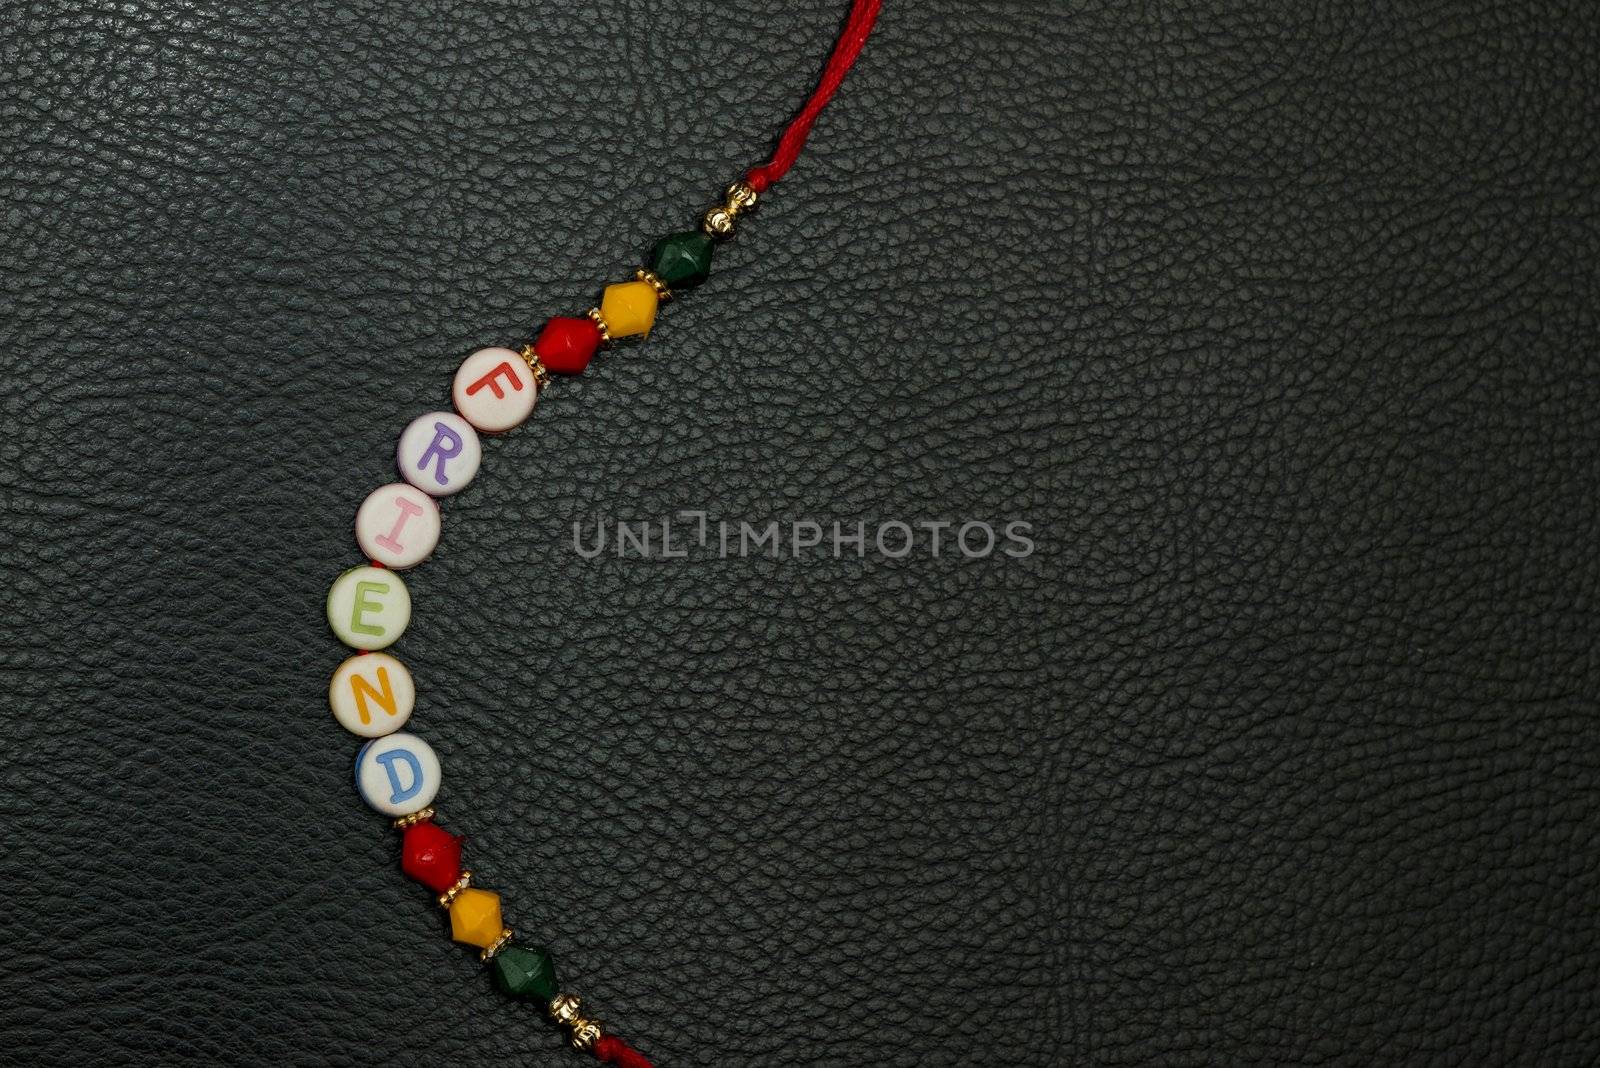 A friendship band isolated on a leather background